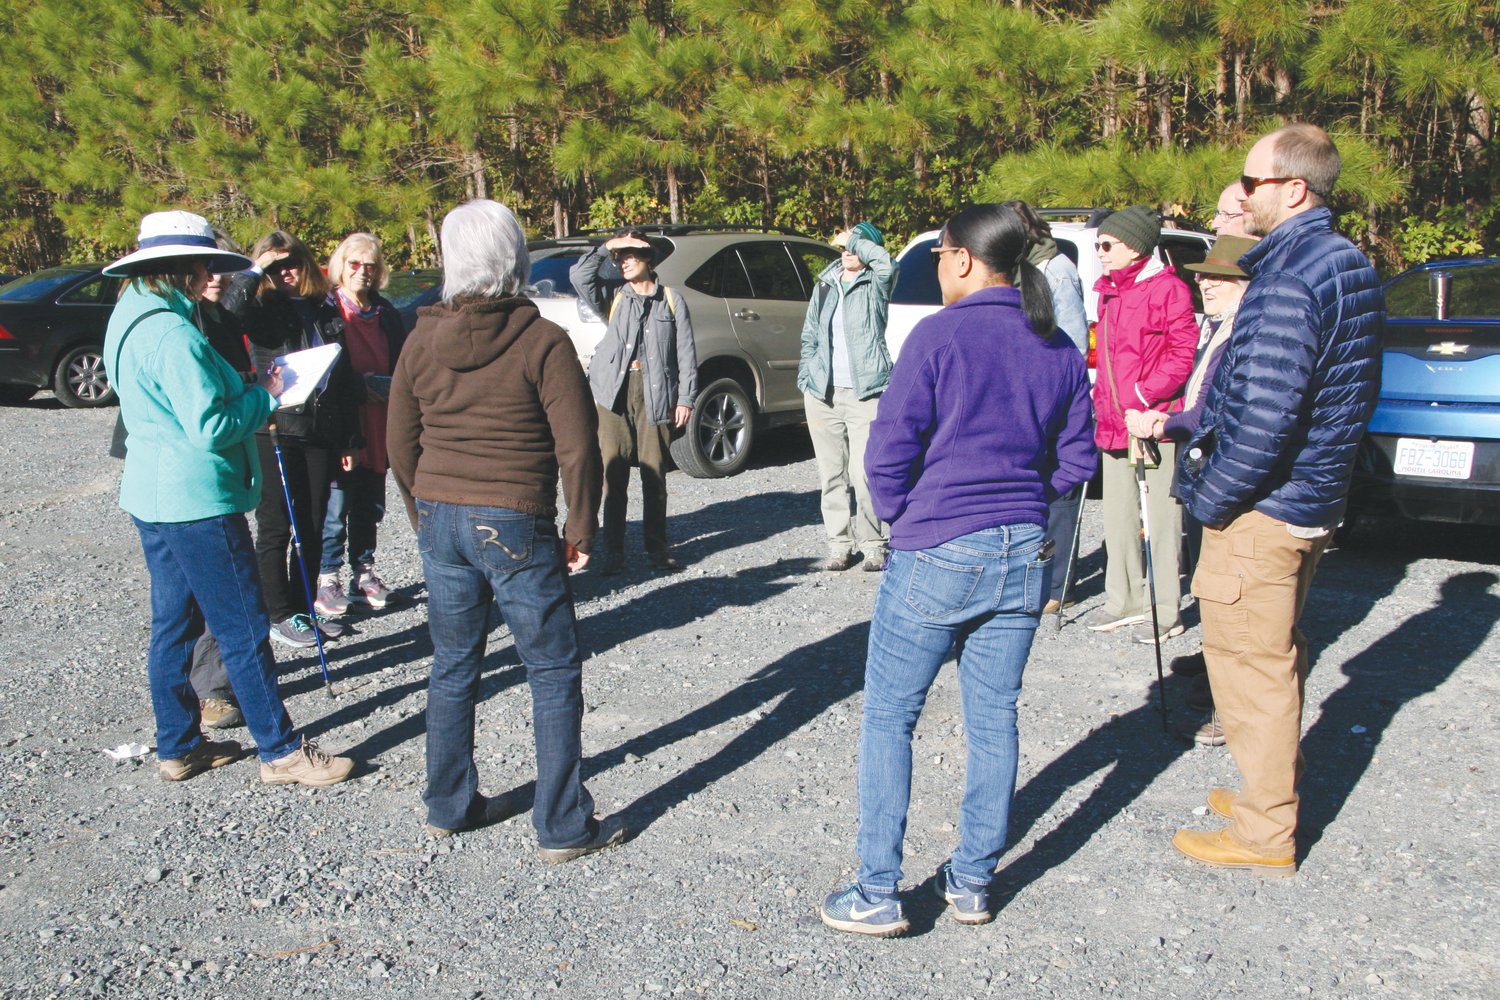 Gretchen Smith checks in attendees before a guided hike in the Lower Haw River State Natural Area.